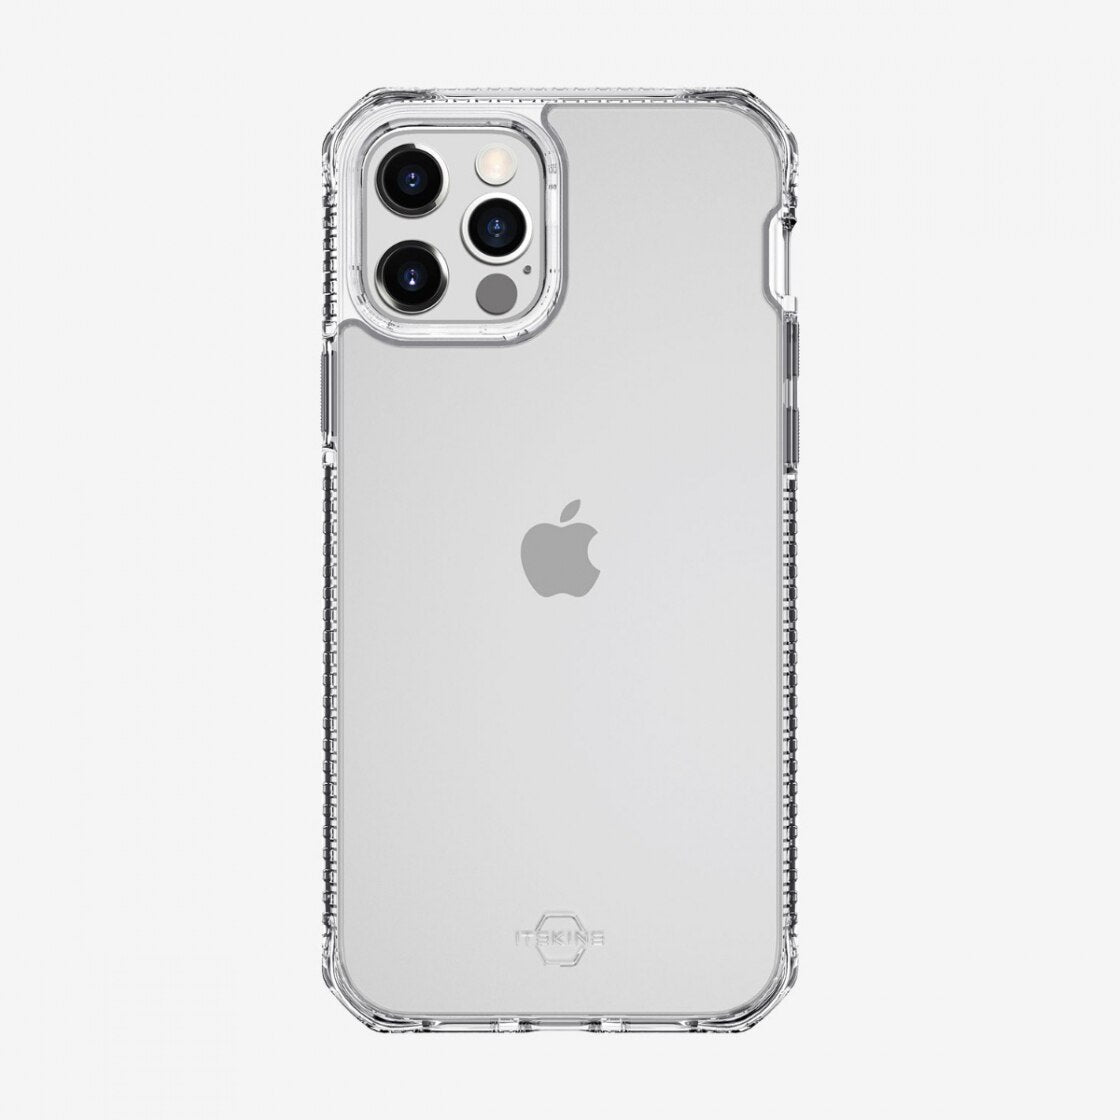 ItSkins Hybrid Clear Case for iPhone 12 Pro Max